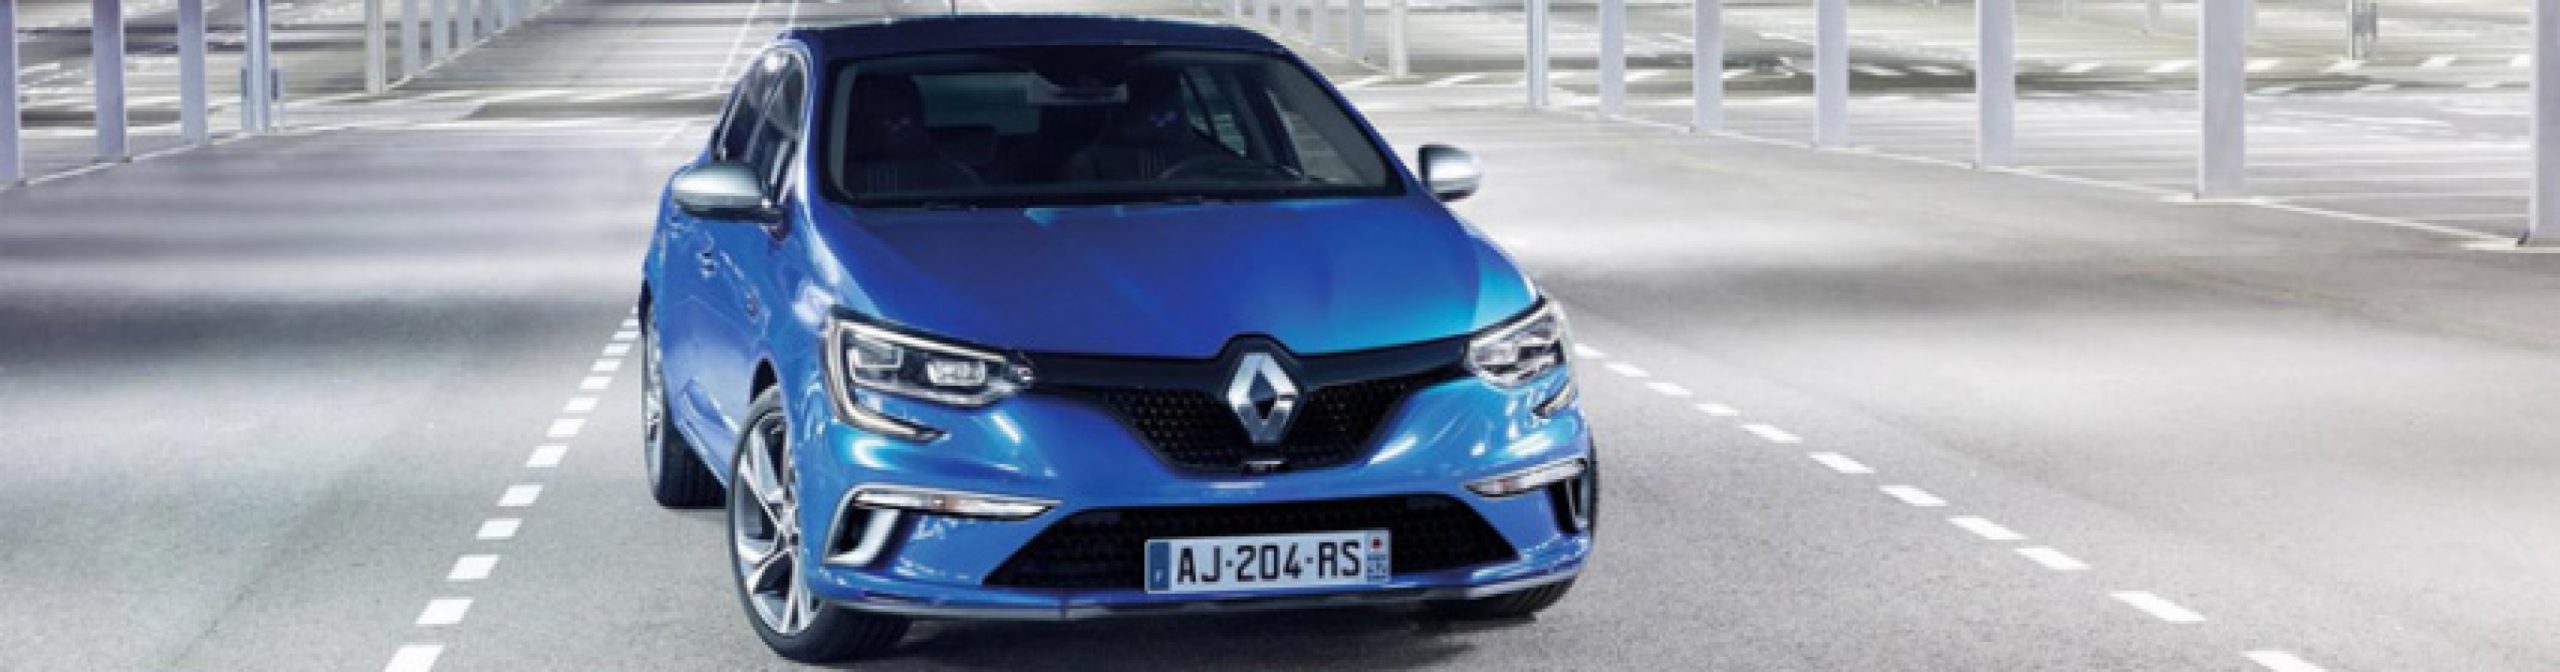 autos, cars, renault, 2016 renault megane and megane gt prepare us for the 2015 fiaa